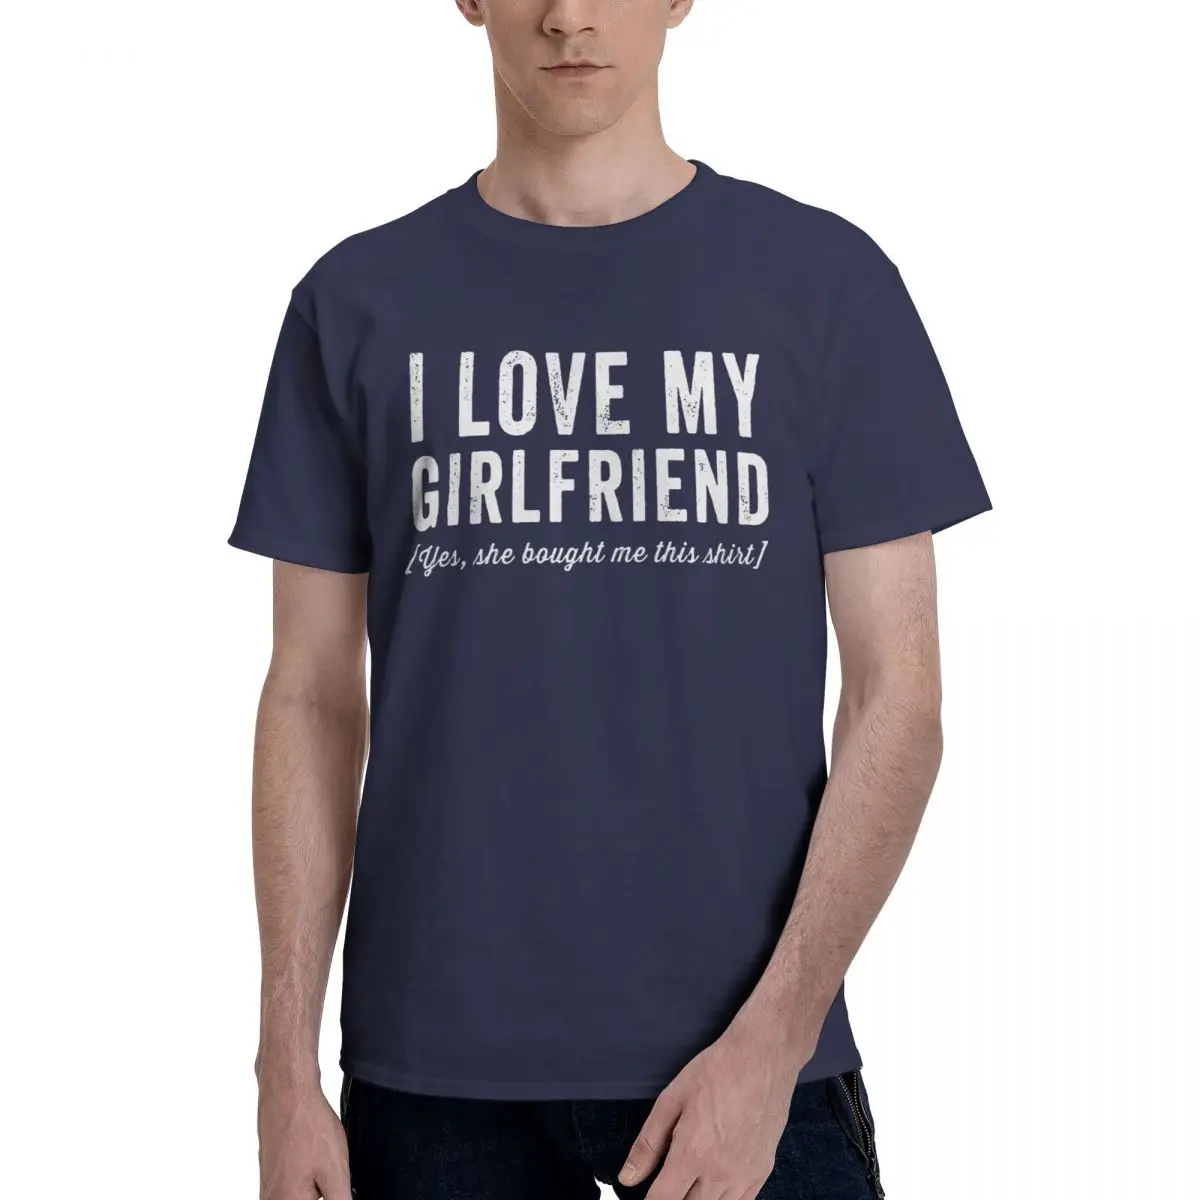 

I Love My Girlfriend Yes She Bought Me This Shirt Men's Leisure Tees Short Sleeve Crewneck T-Shirt 100% Cotton Party Clothing